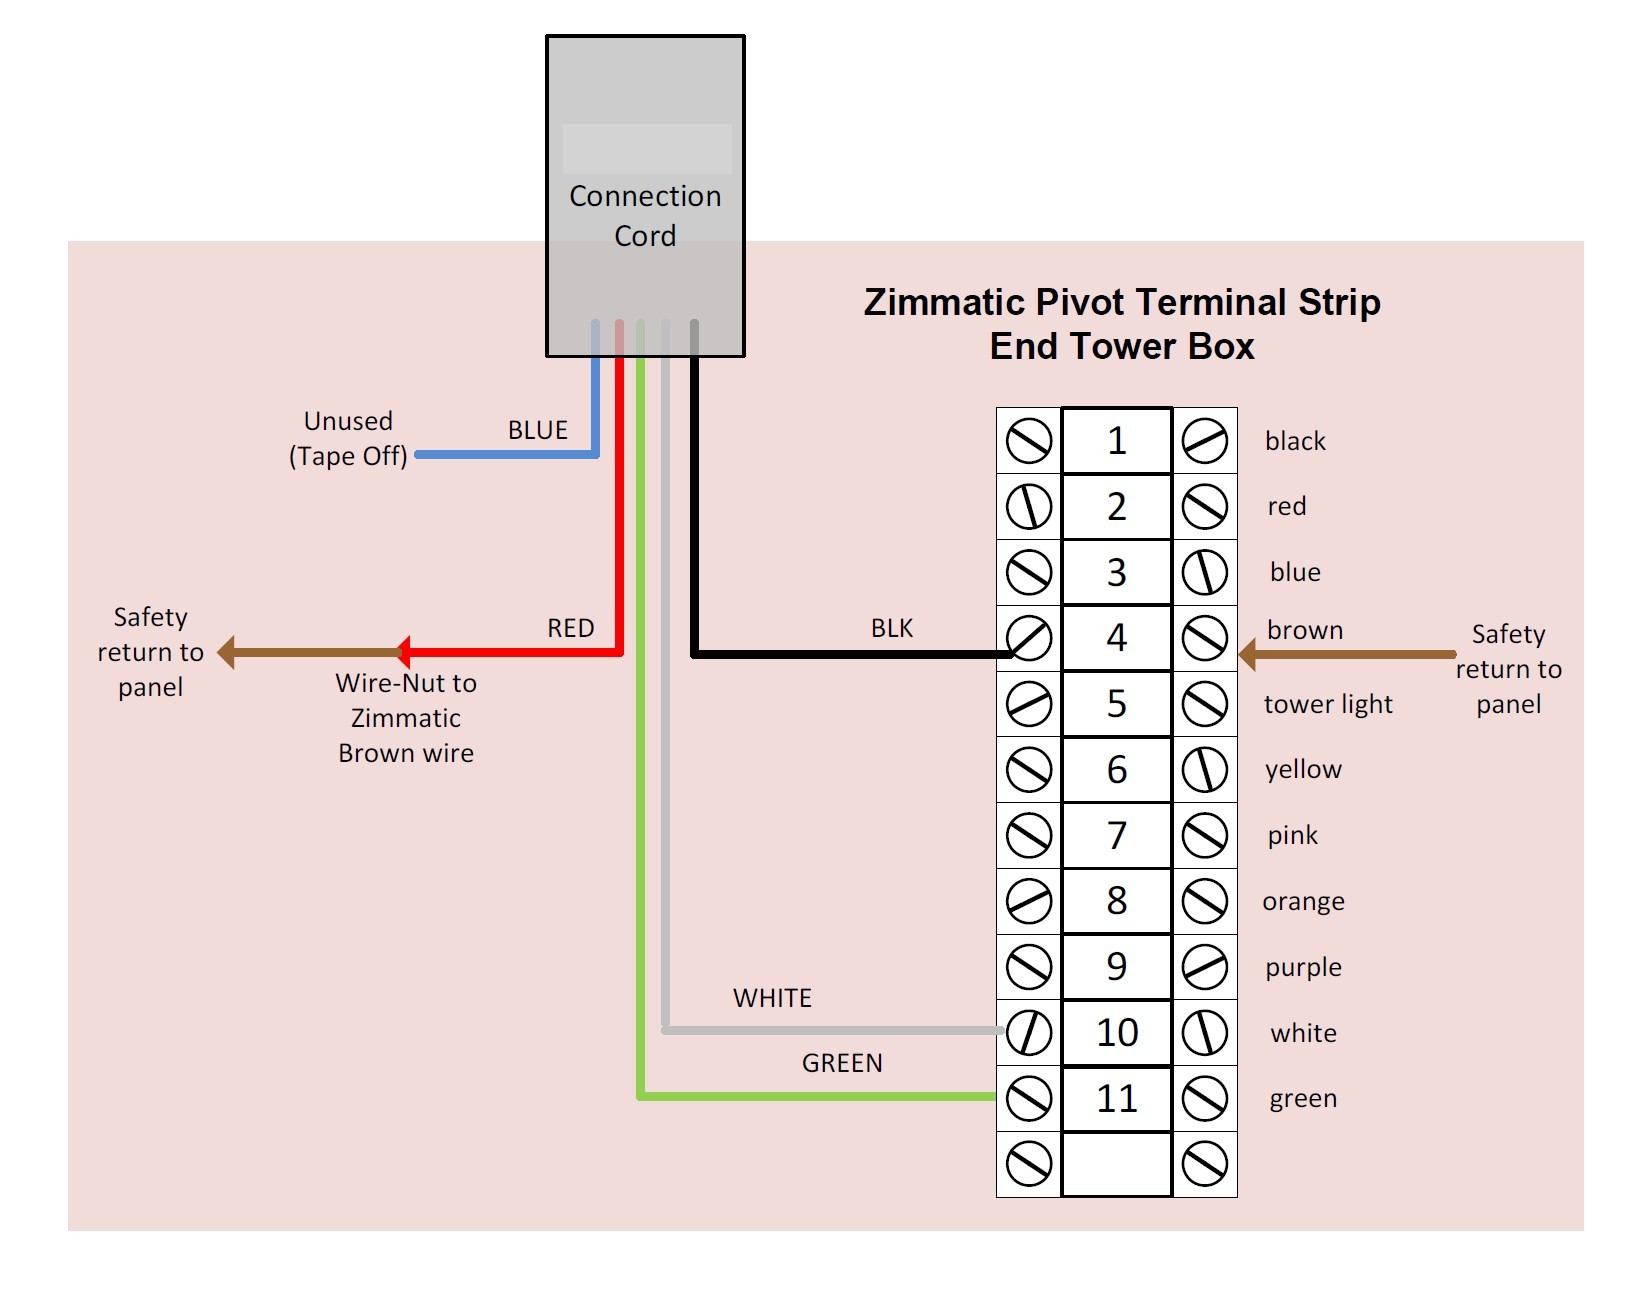 Zimmatic Pivot Parts Awesome | Wiring Diagram Image